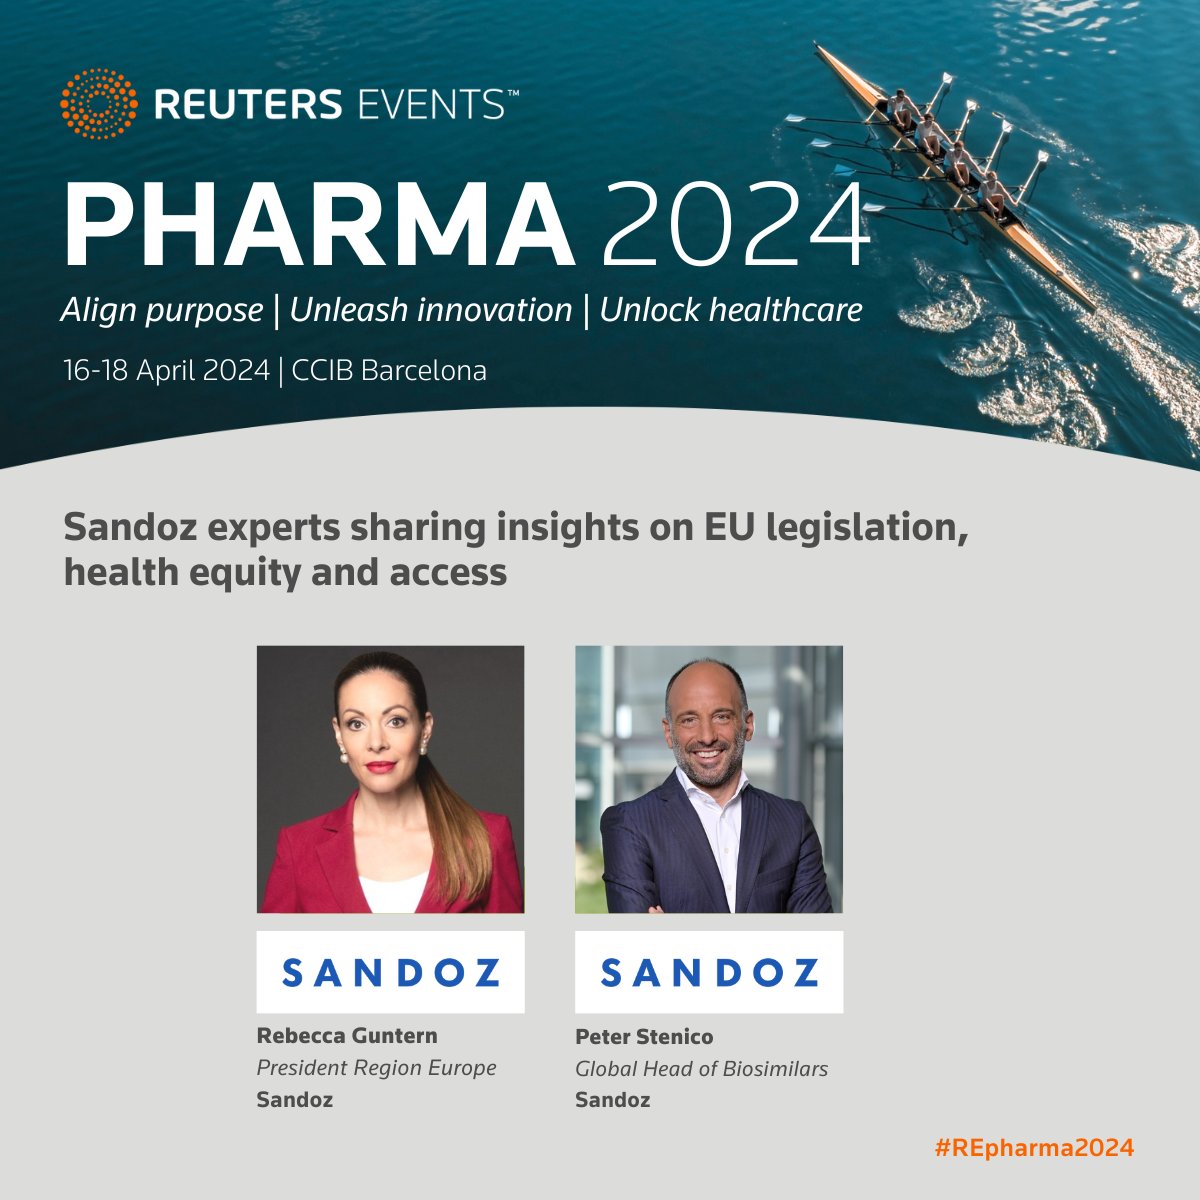 How can EU pharma legislation be reviewed to promote timely, equitable & expanded access to high-quality & affordable #generics & #biosimilars?📈 This is one of the topics we are discussing at this year’s @RE_Pharma. Follow us for more updates! #Healthcare #REPharma2024